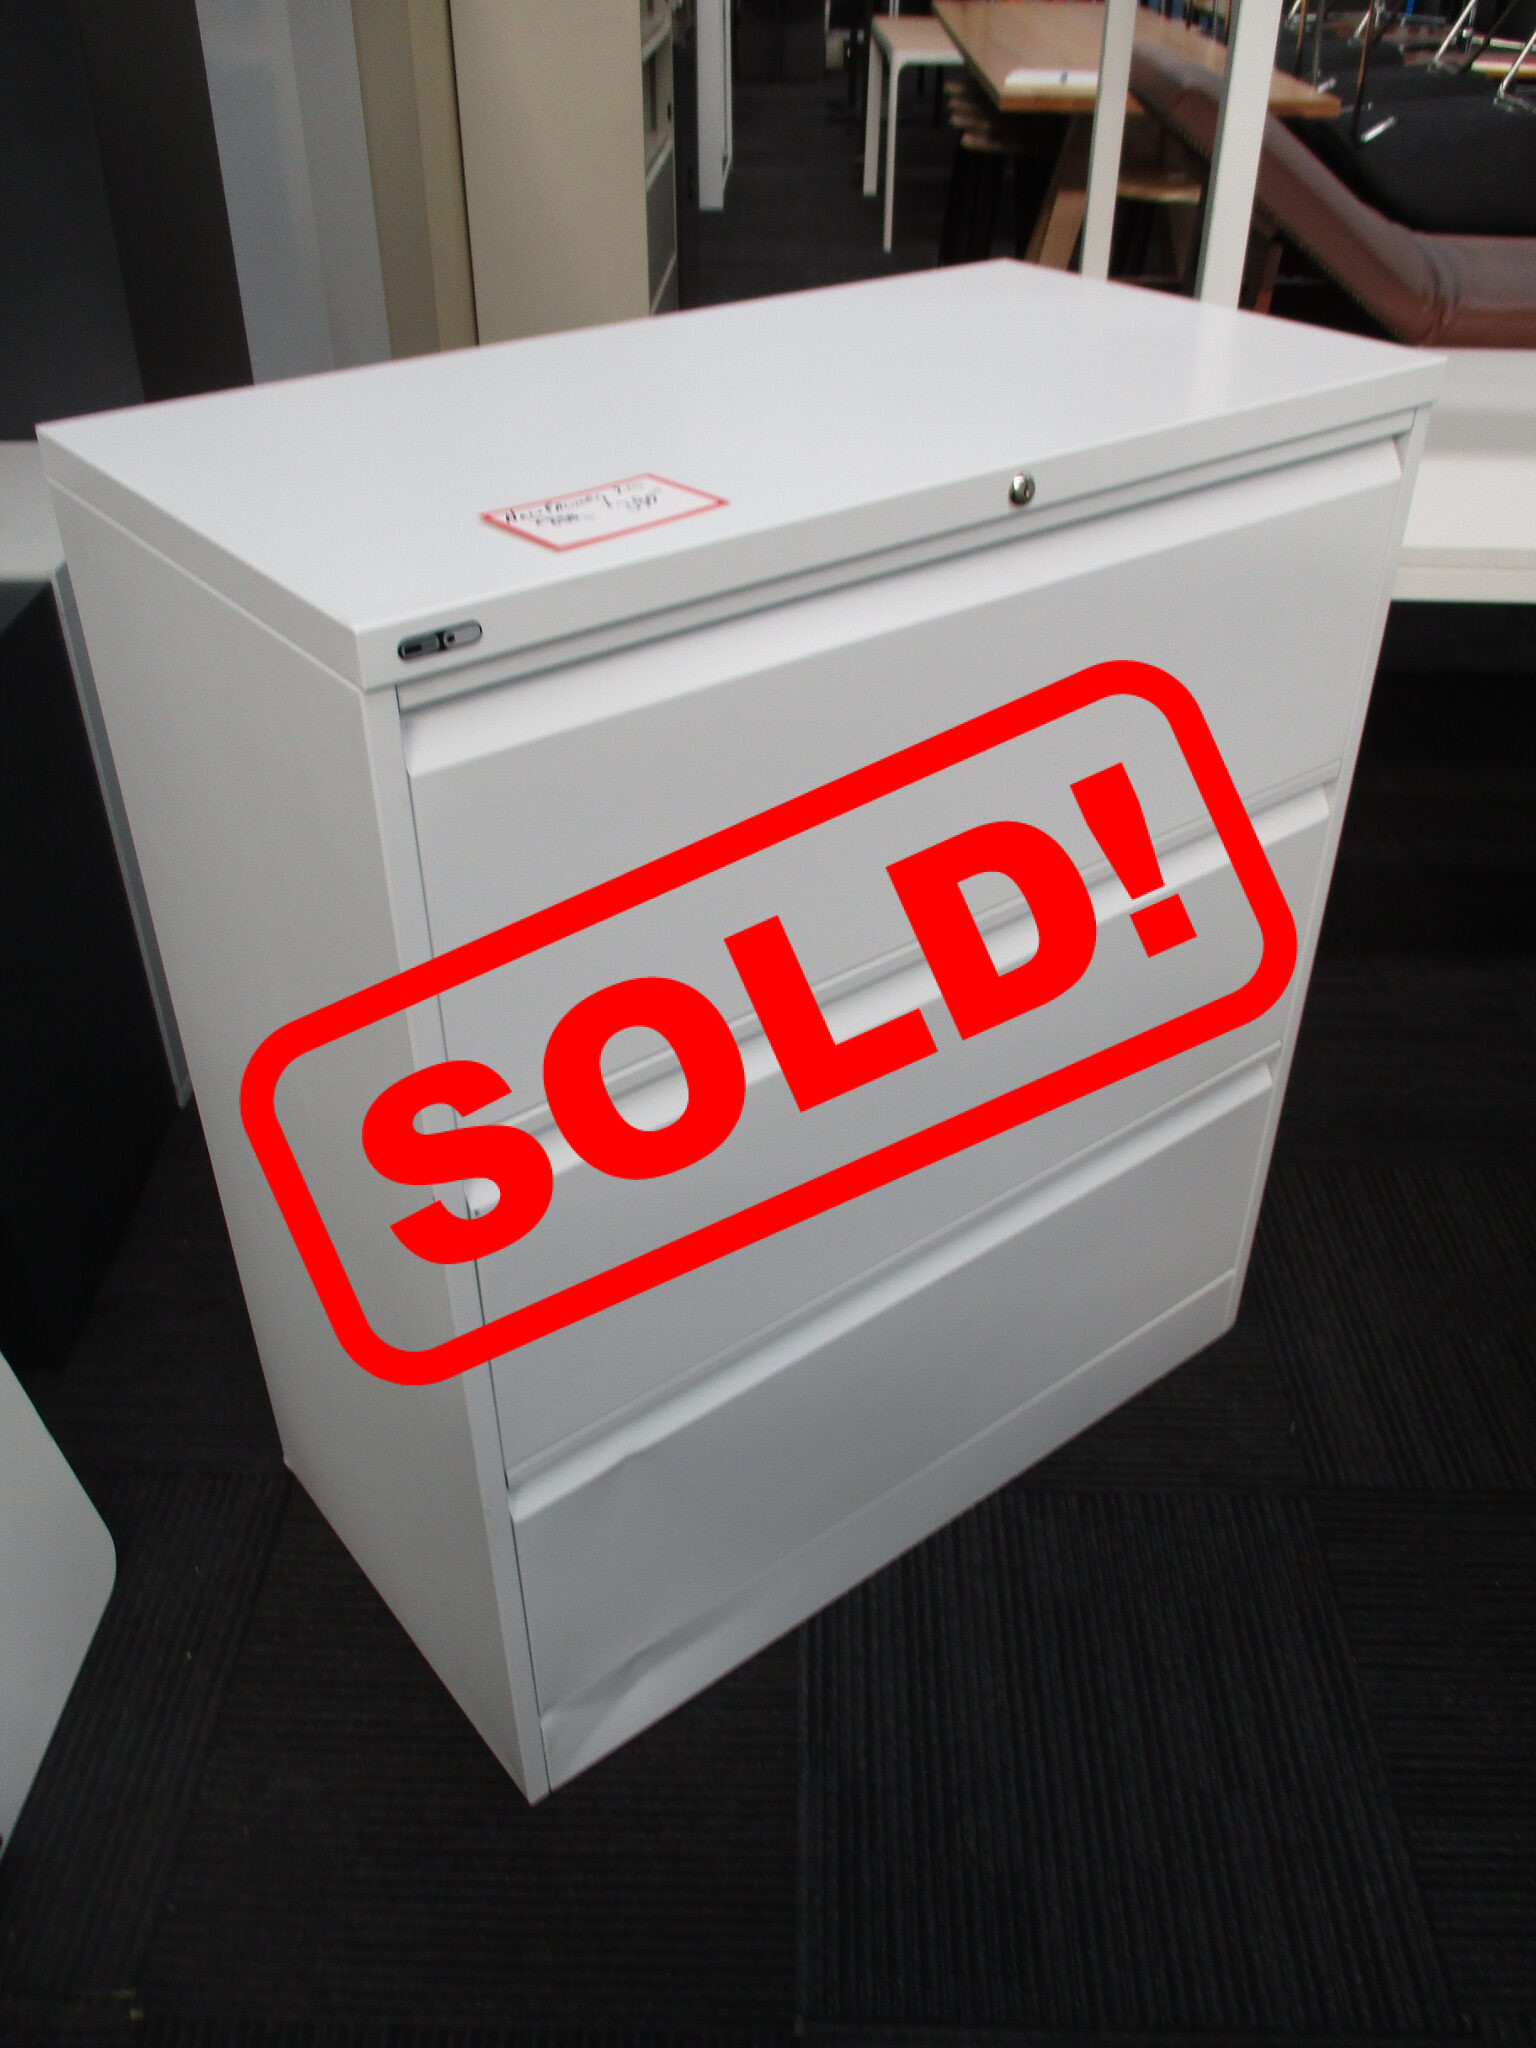 GO 3 Drawer Lateral Filing Cabinet $390